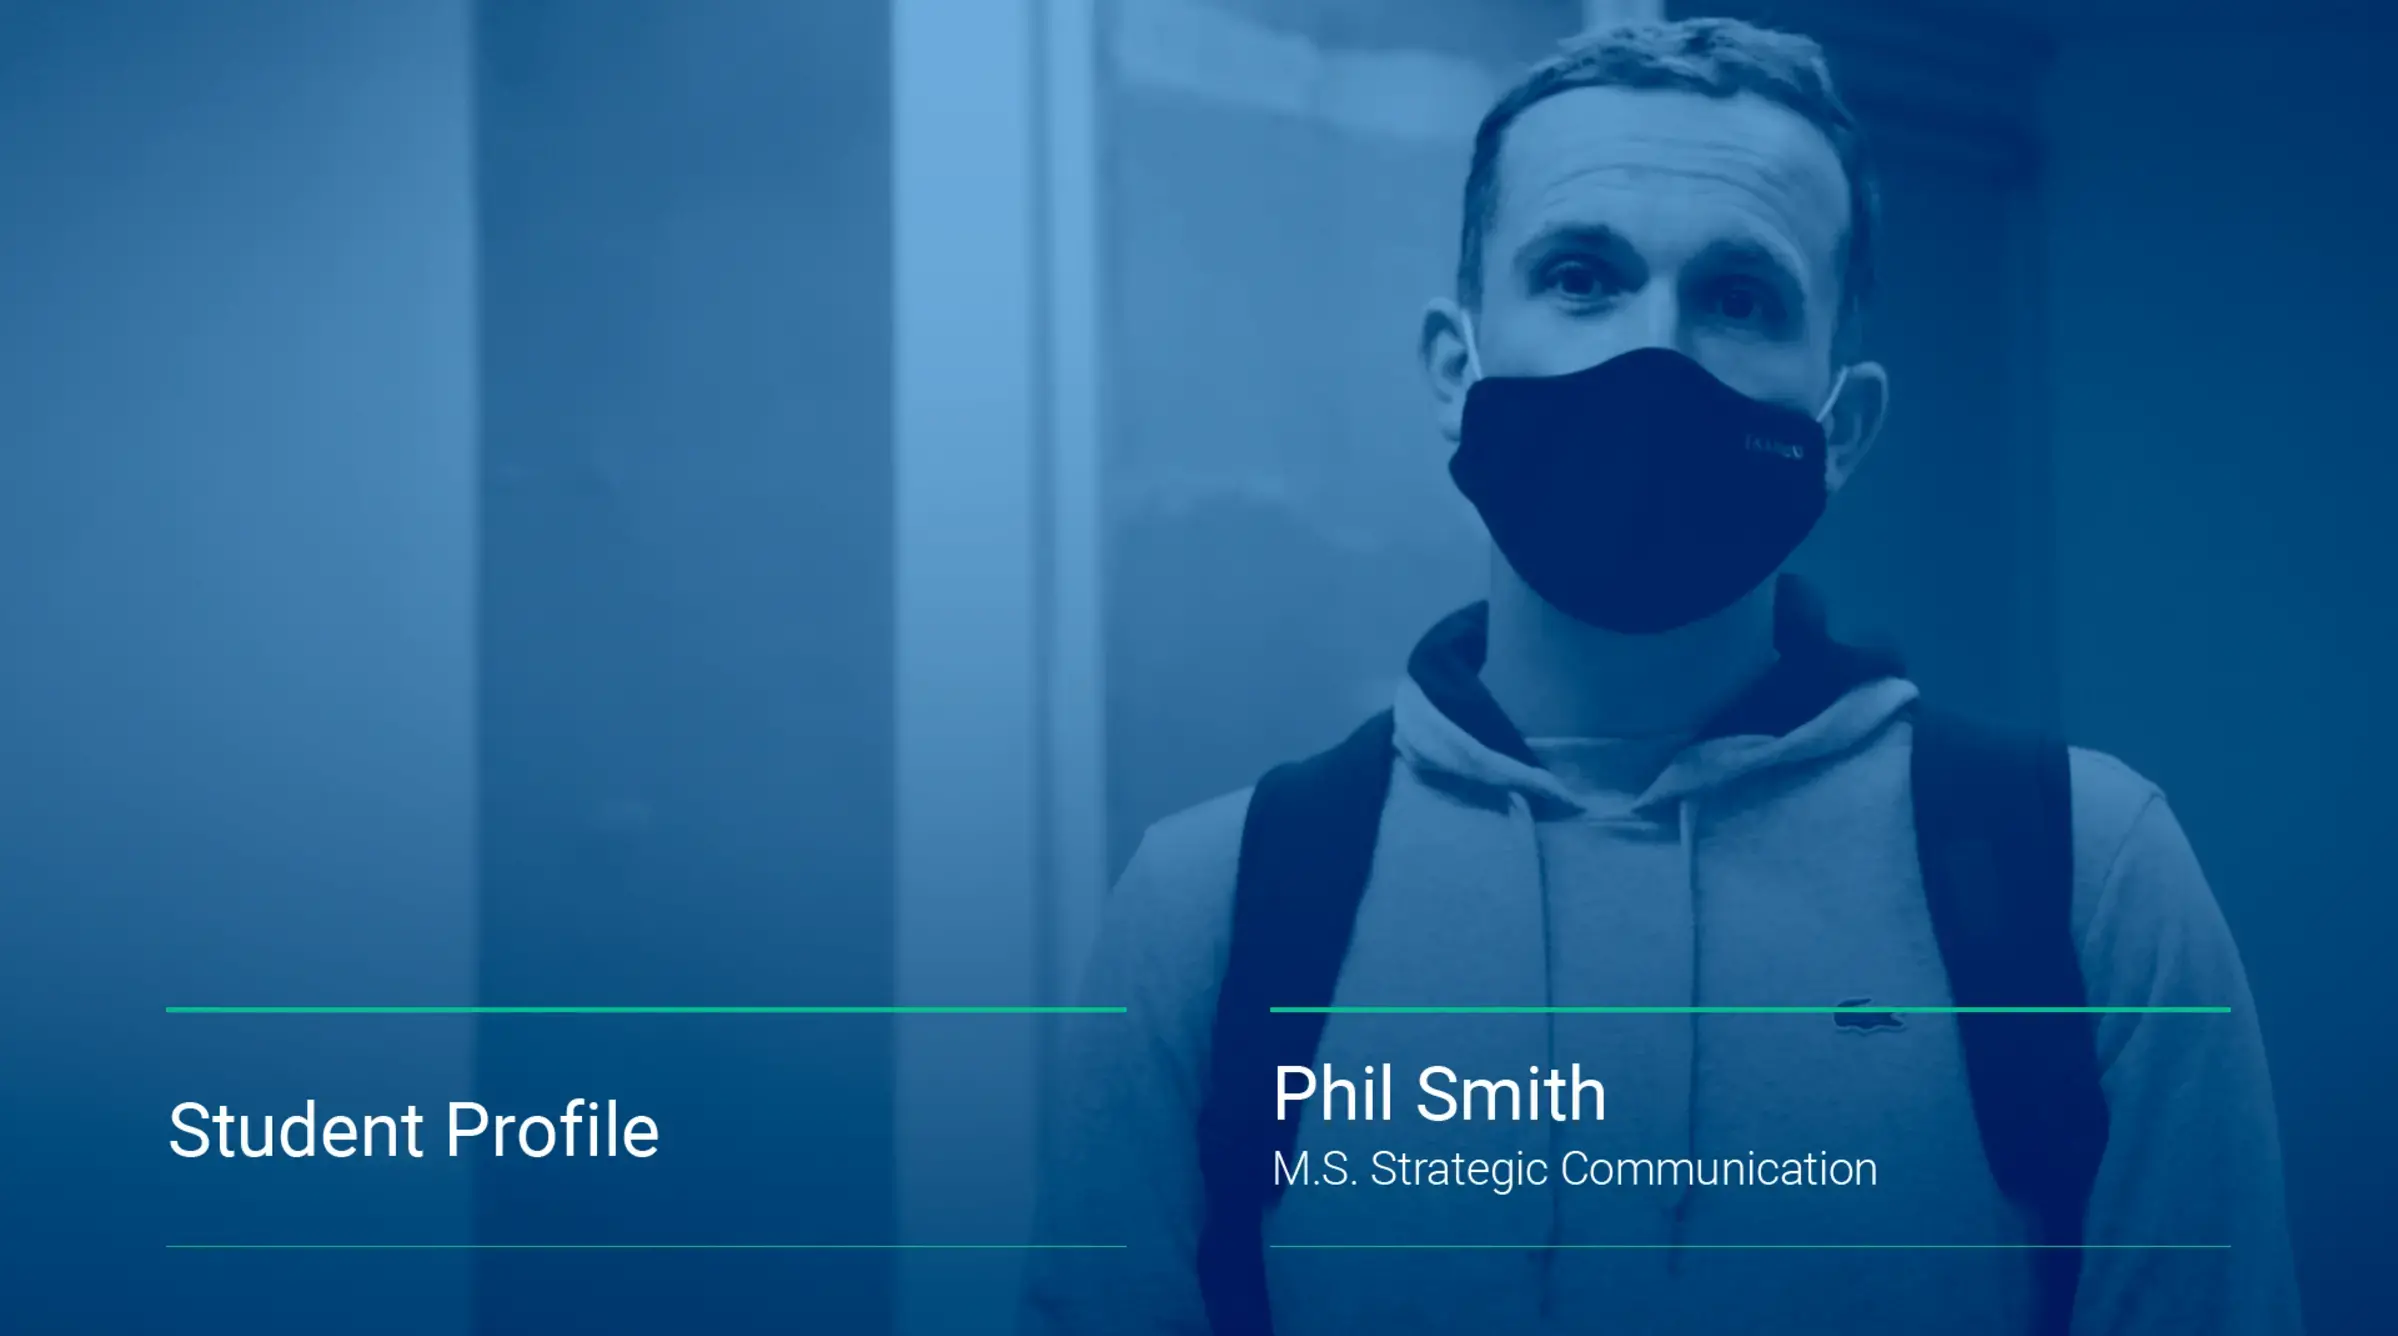 An image displays a still from a video interview featuring Phil Smith, '21SPS, Strategic Communication.